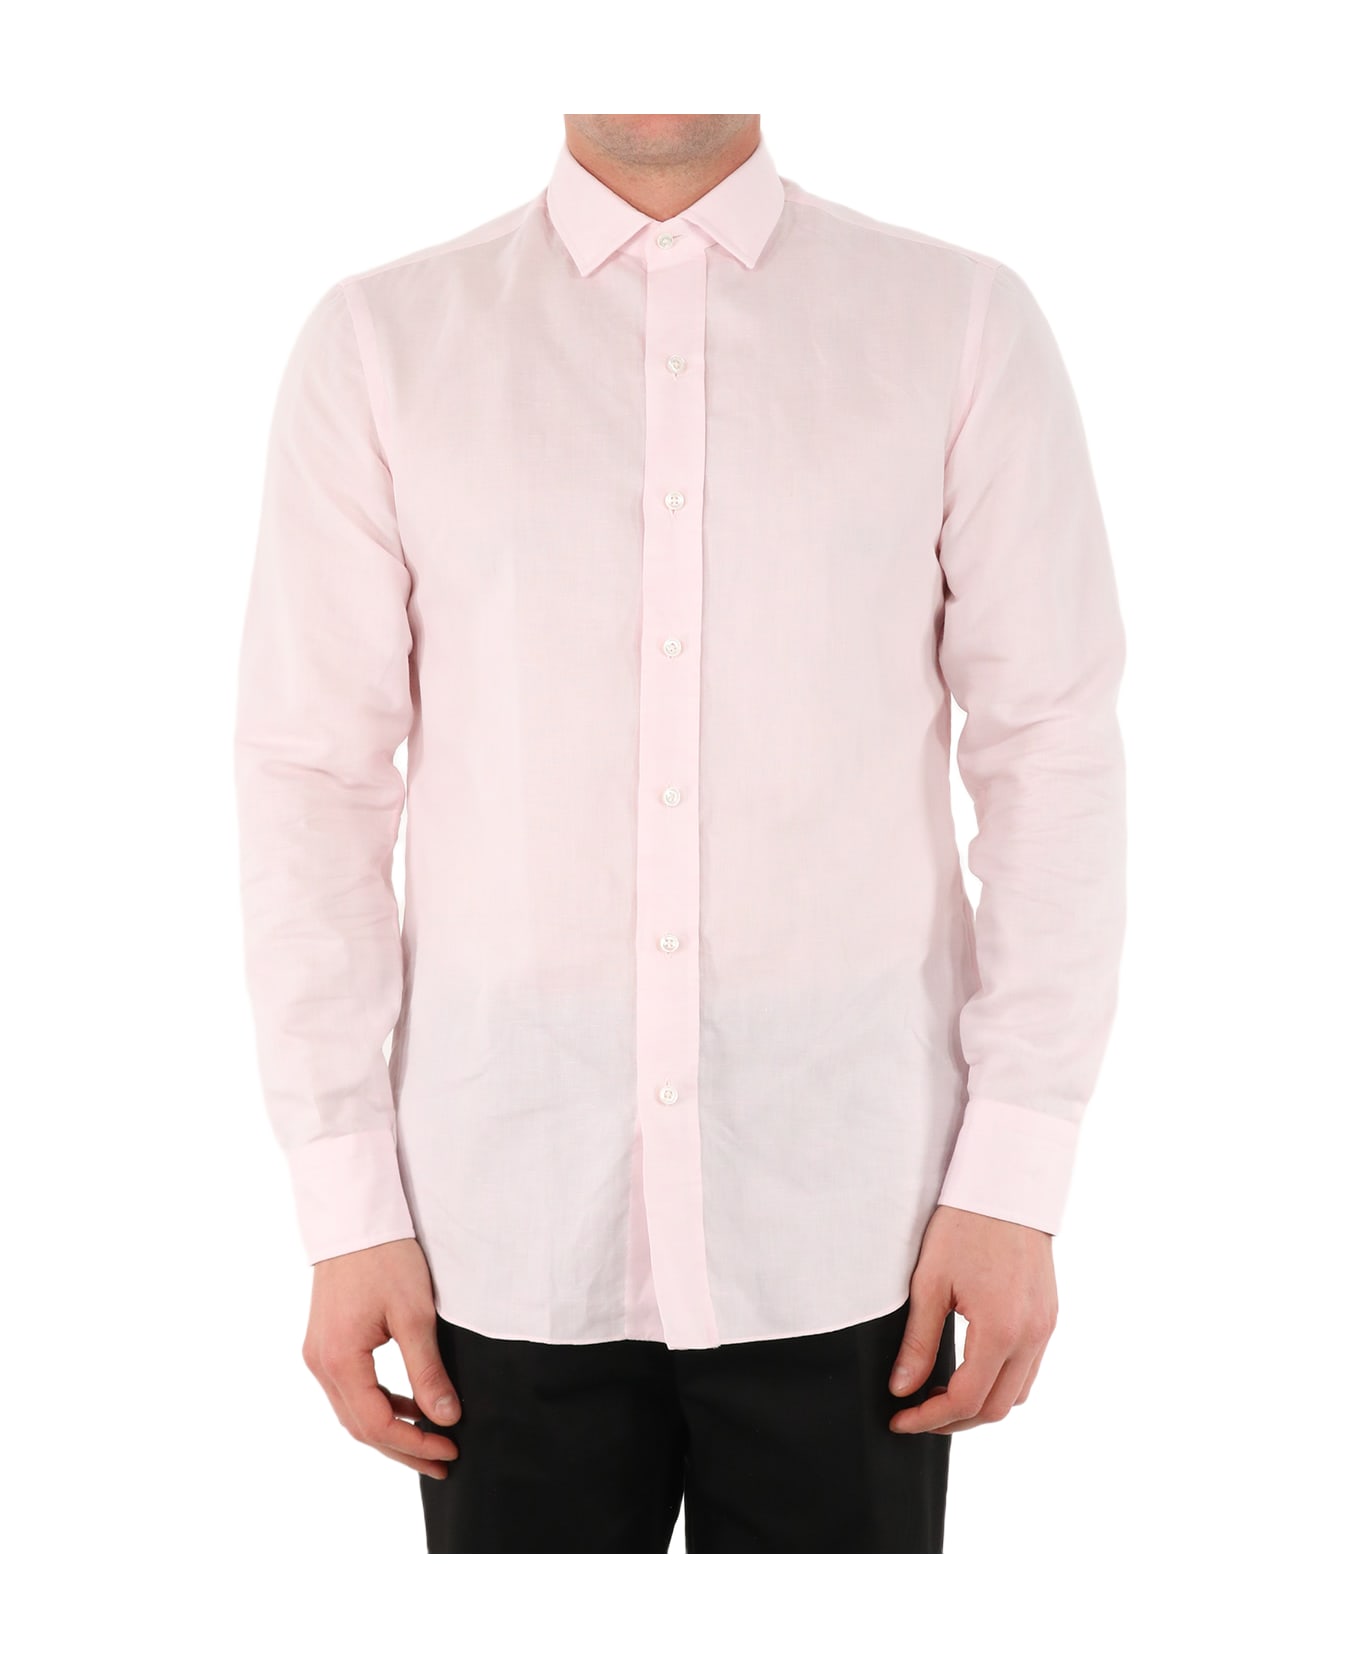 Salvatore Piccolo Pink Shirt With Open Collar - PINK